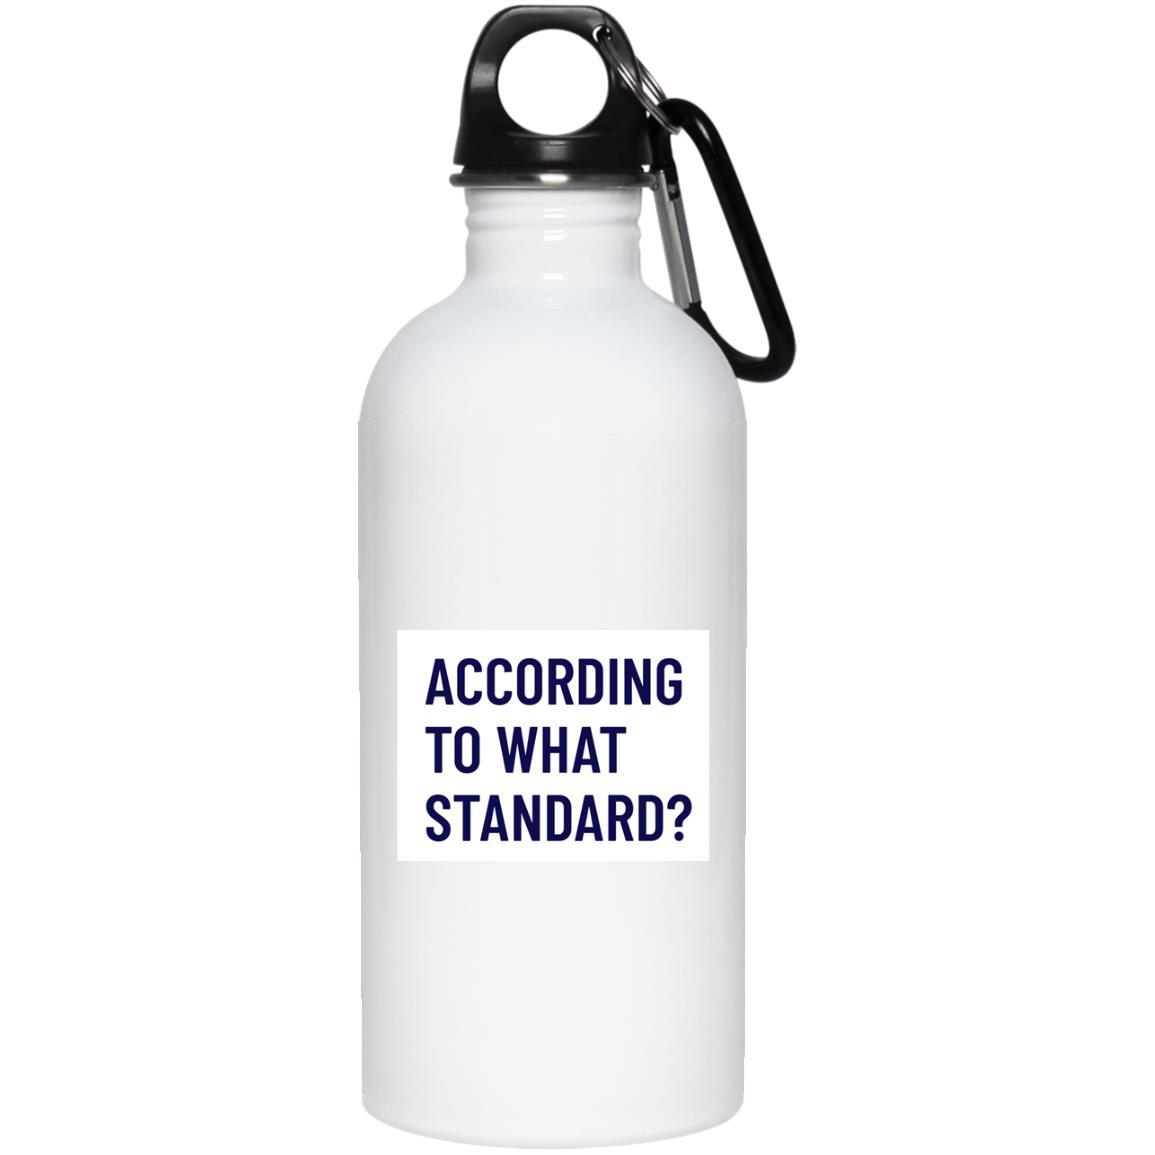 According to What Standard (20oz Steel Water Bottle) - SDG Clothing